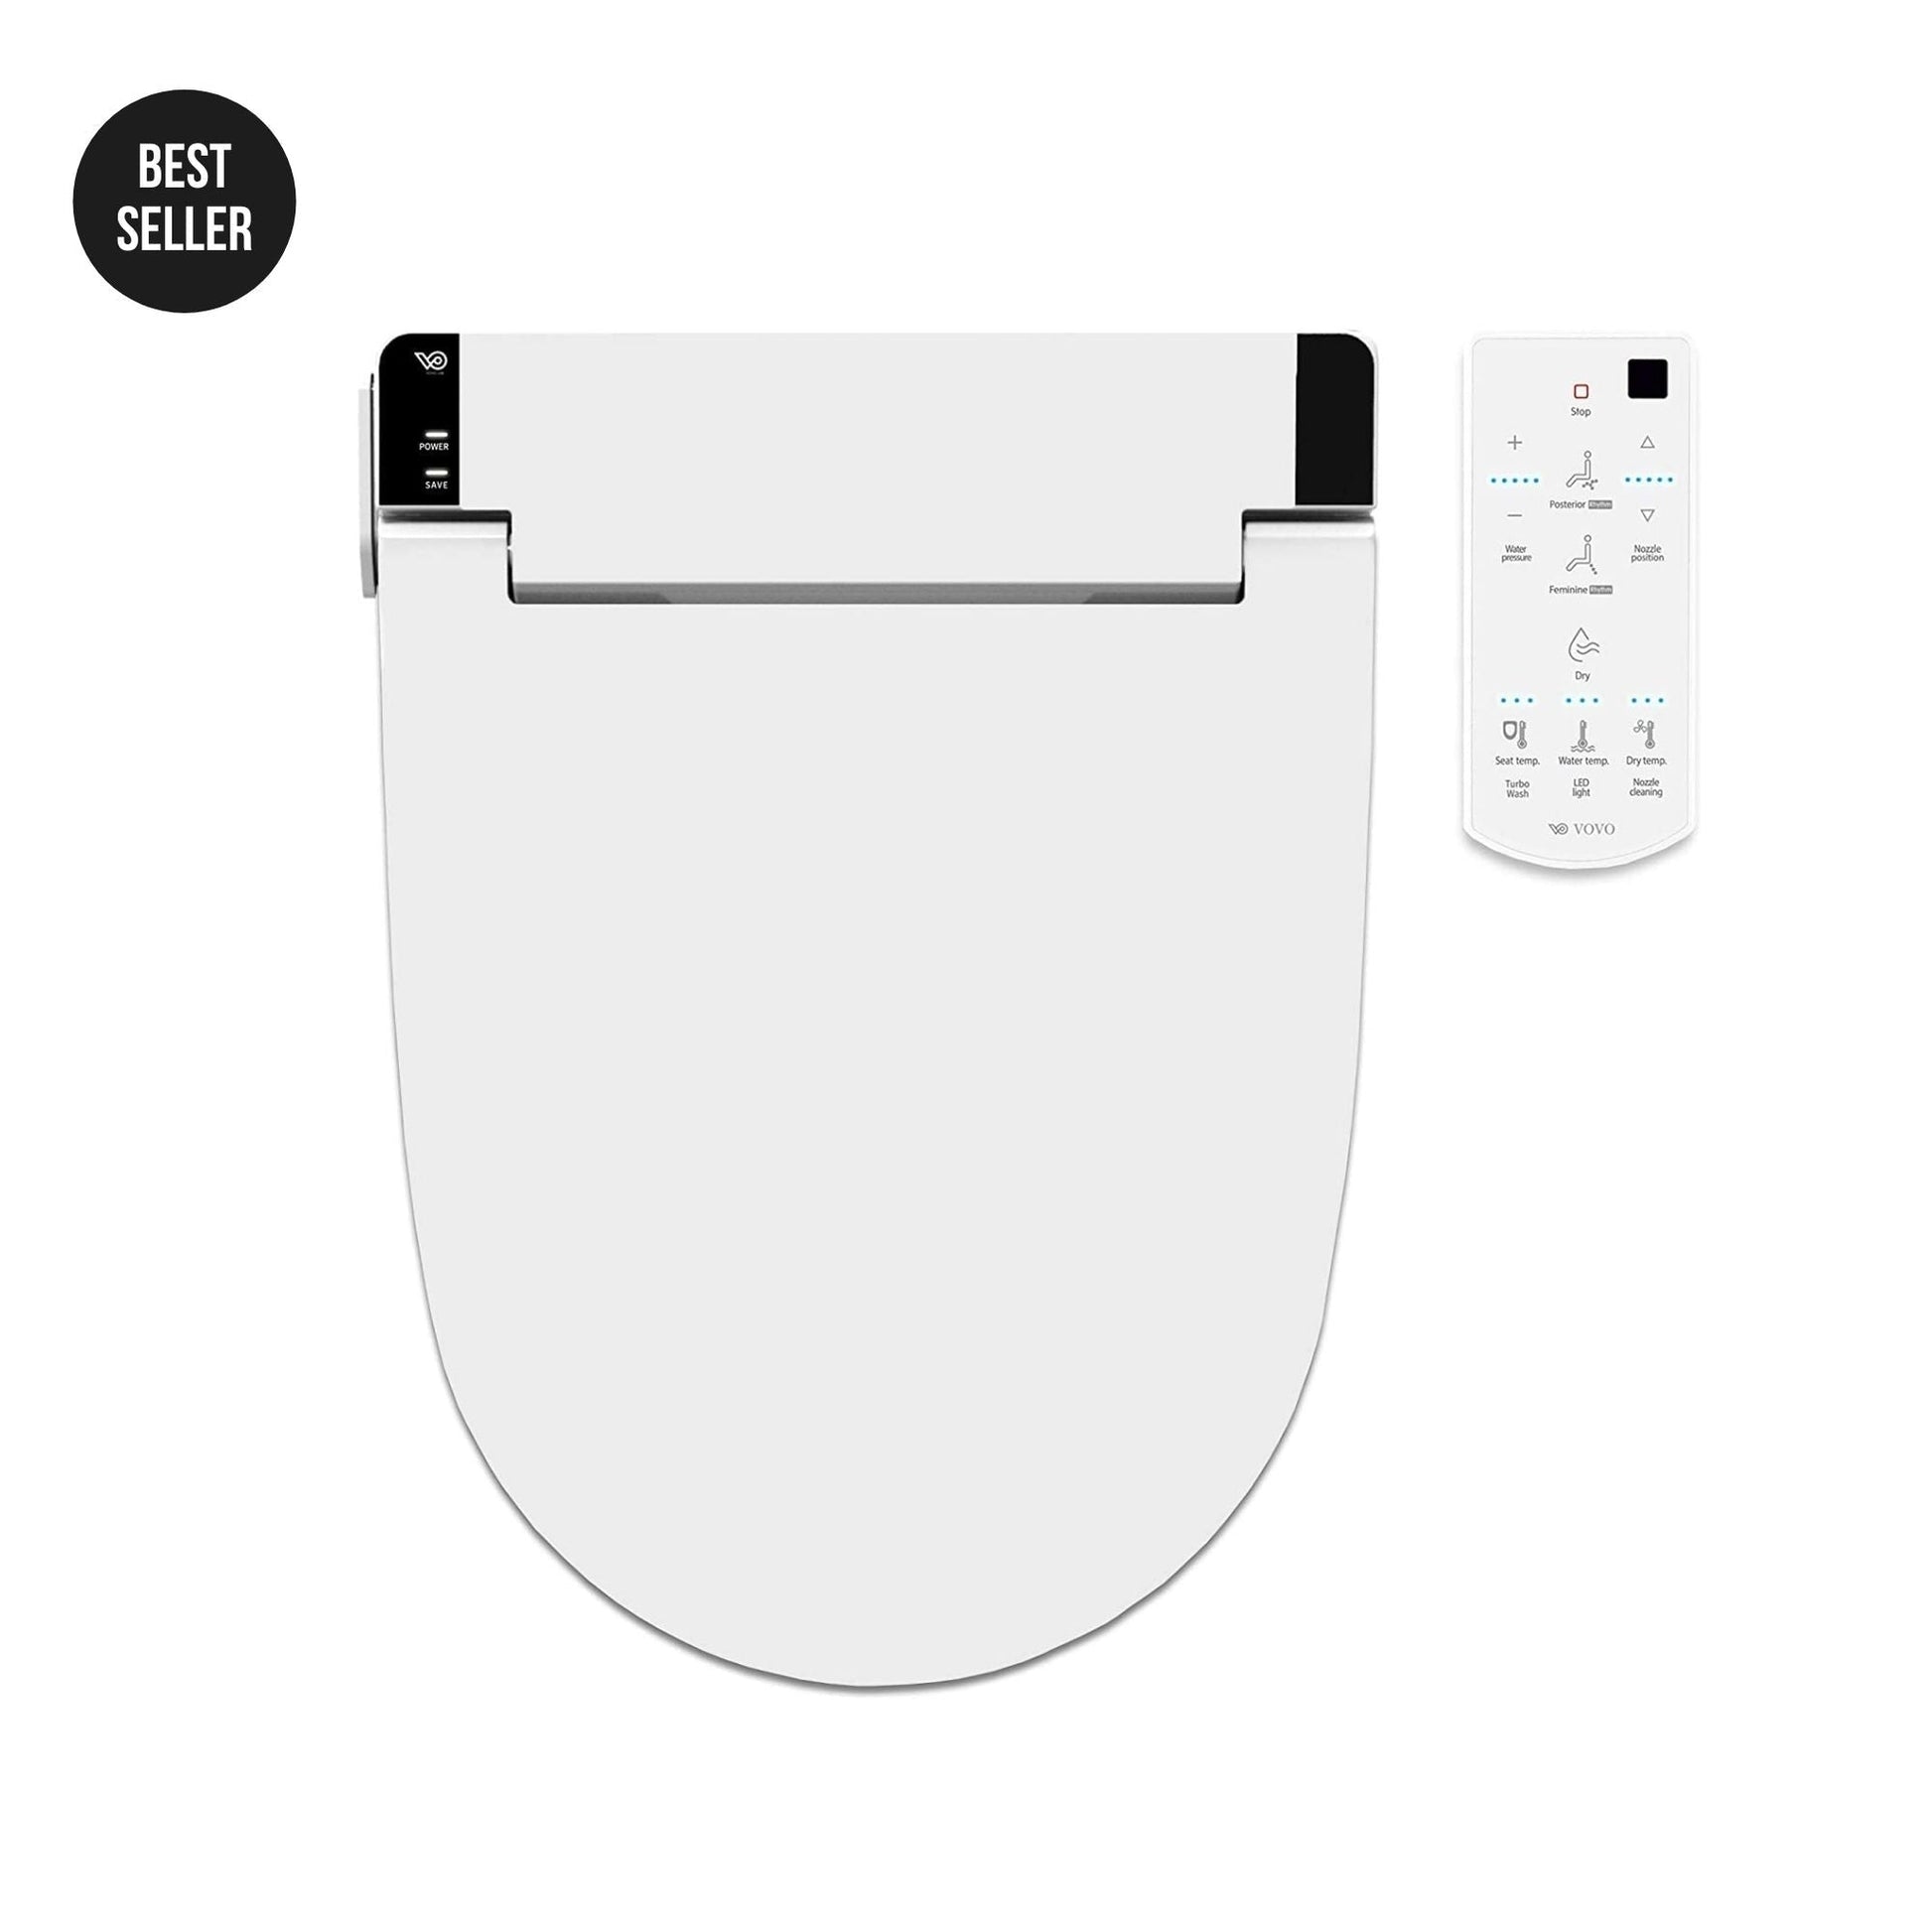 VOVO Stylement VB-6000SE Elongated Electric Premium Smart Bidet Toilet Seat With Wireless Remote Control